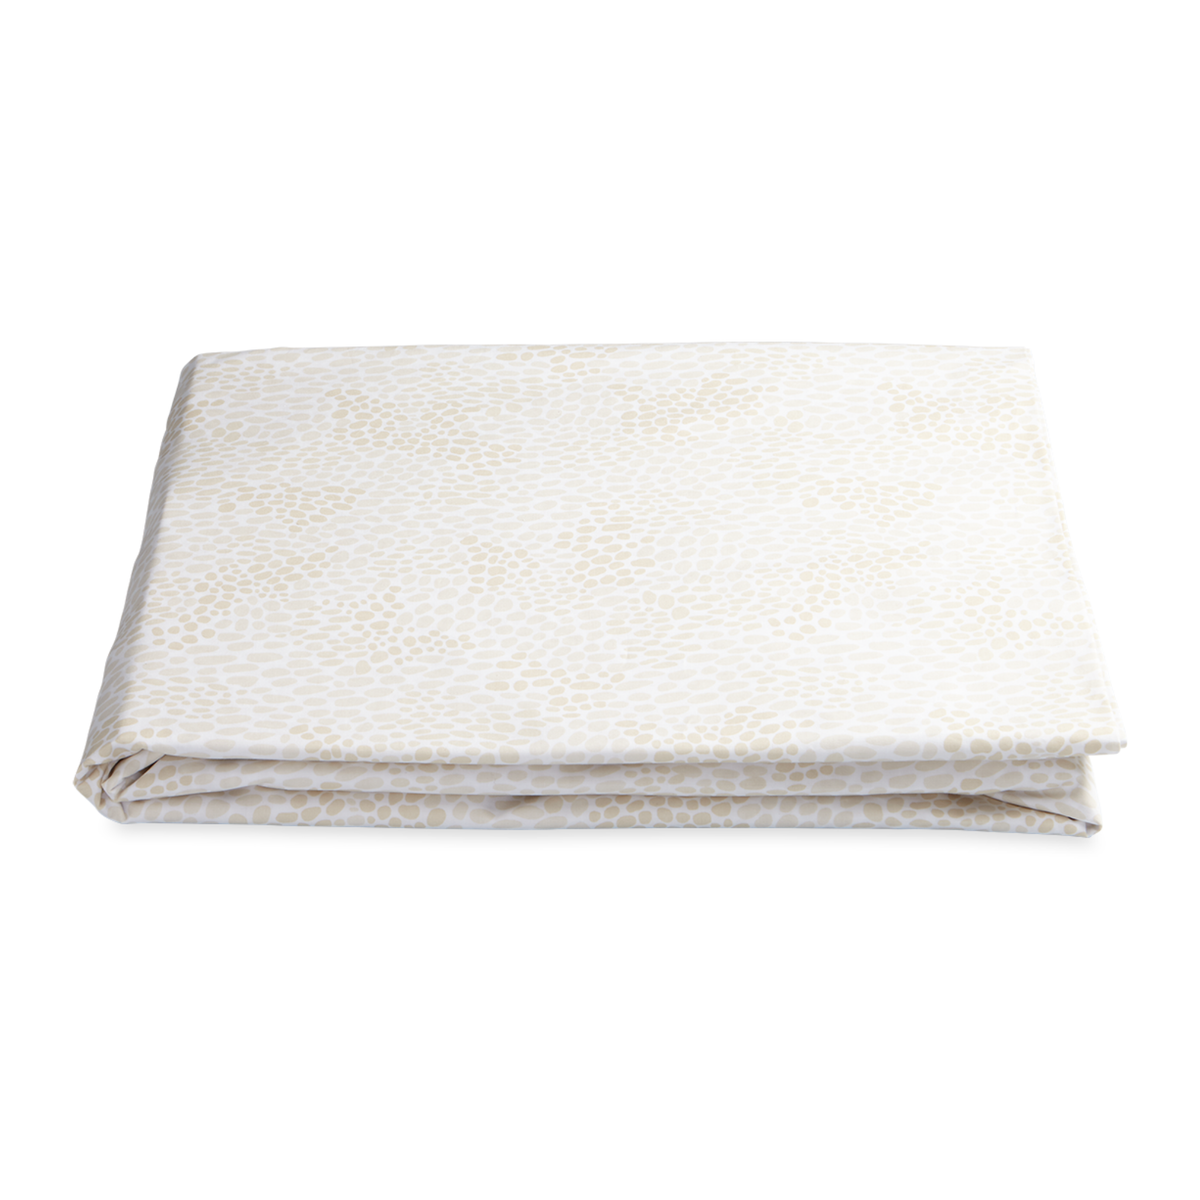 Fitted Sheet of Lulu DK Matouk Nikita Bedding in Champagne Color